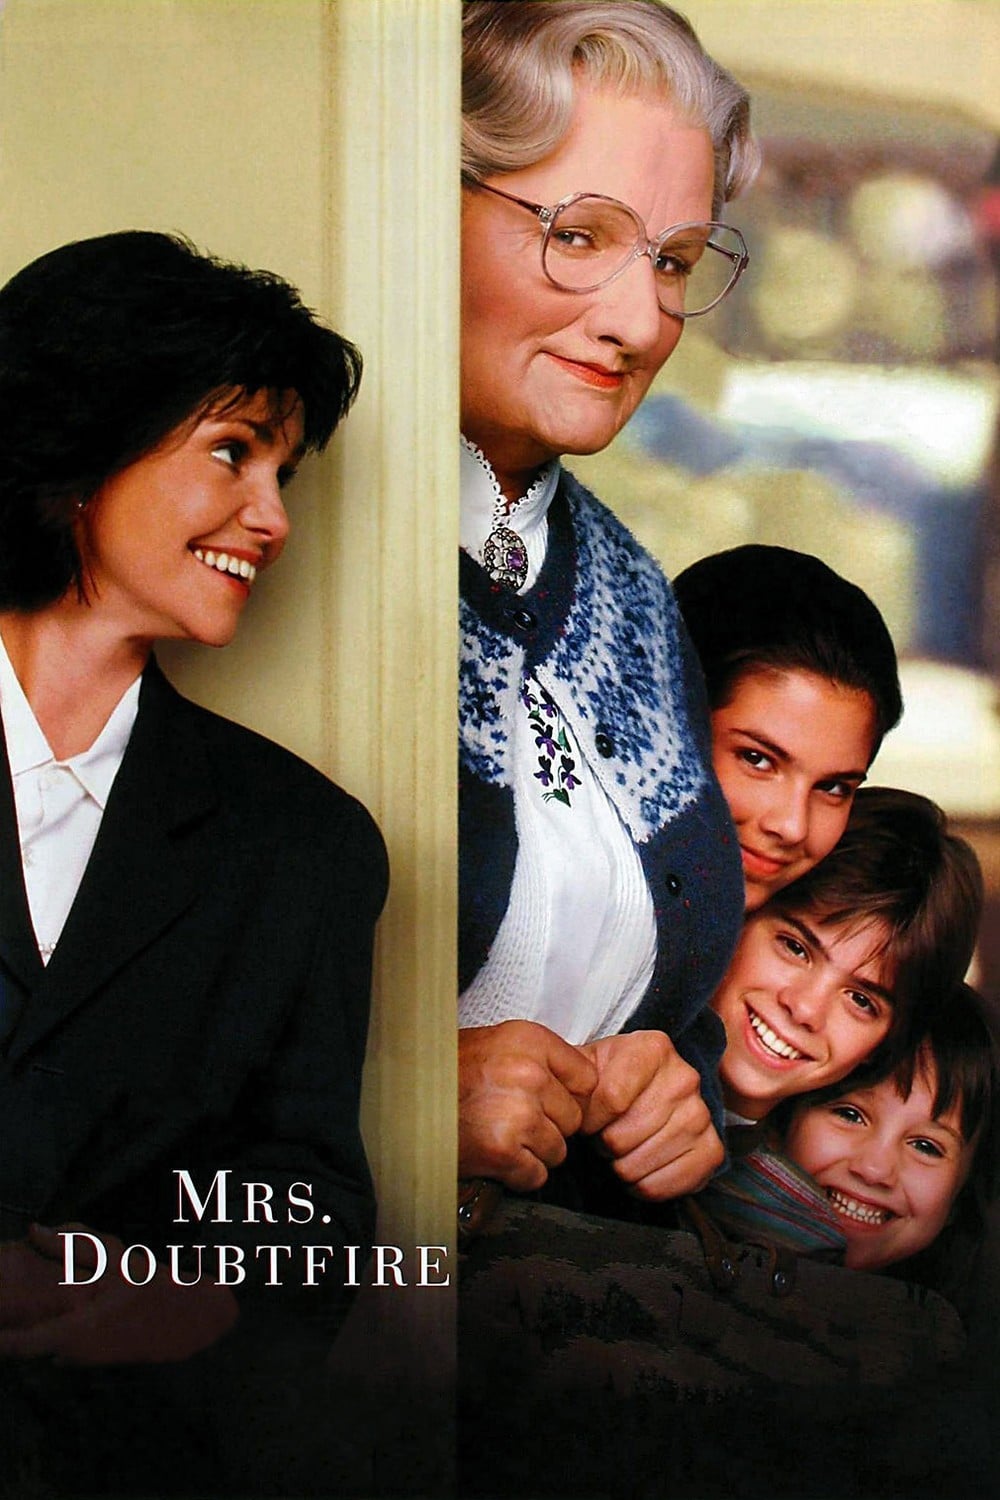 Poster for the movie "Mrs. Doubtfire"